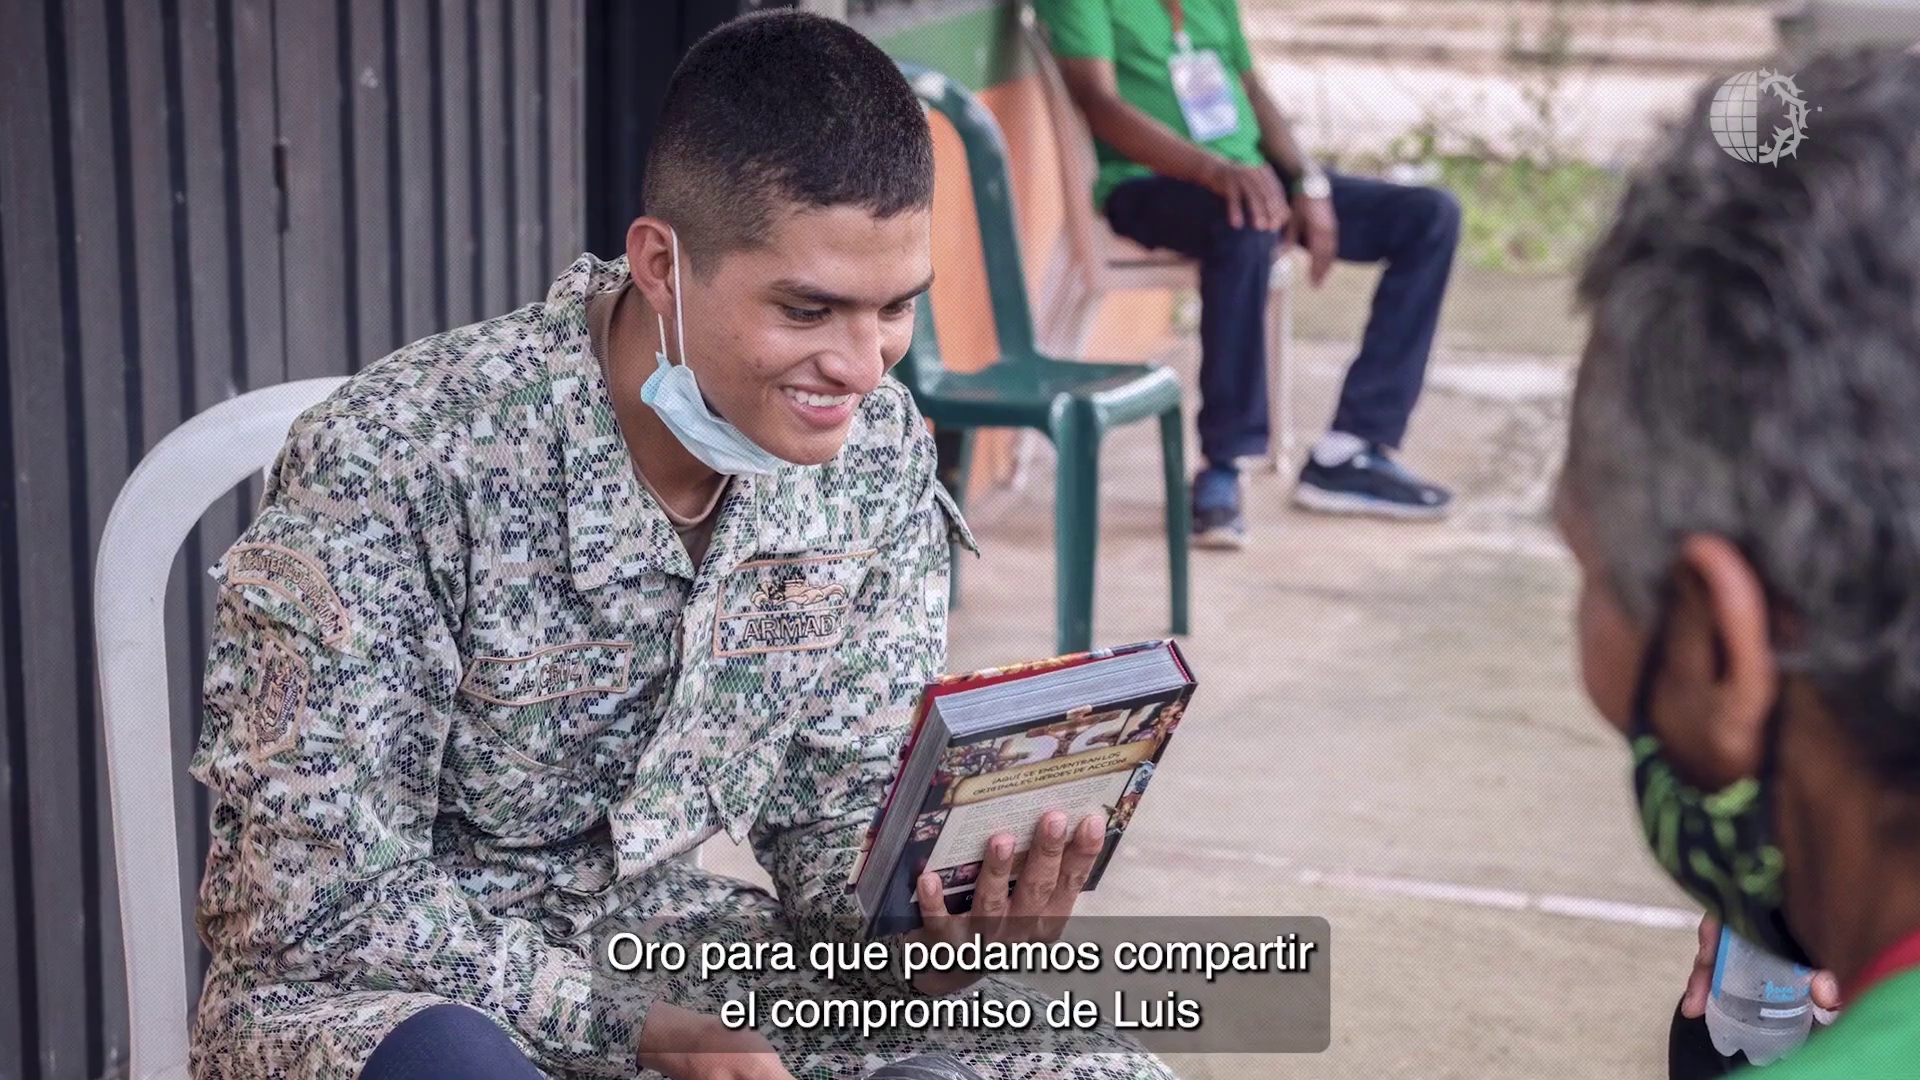 Luis survived an attack by the FARC on his village in one of the "red zones" of Colombia and he knew that God was calling him to serve.